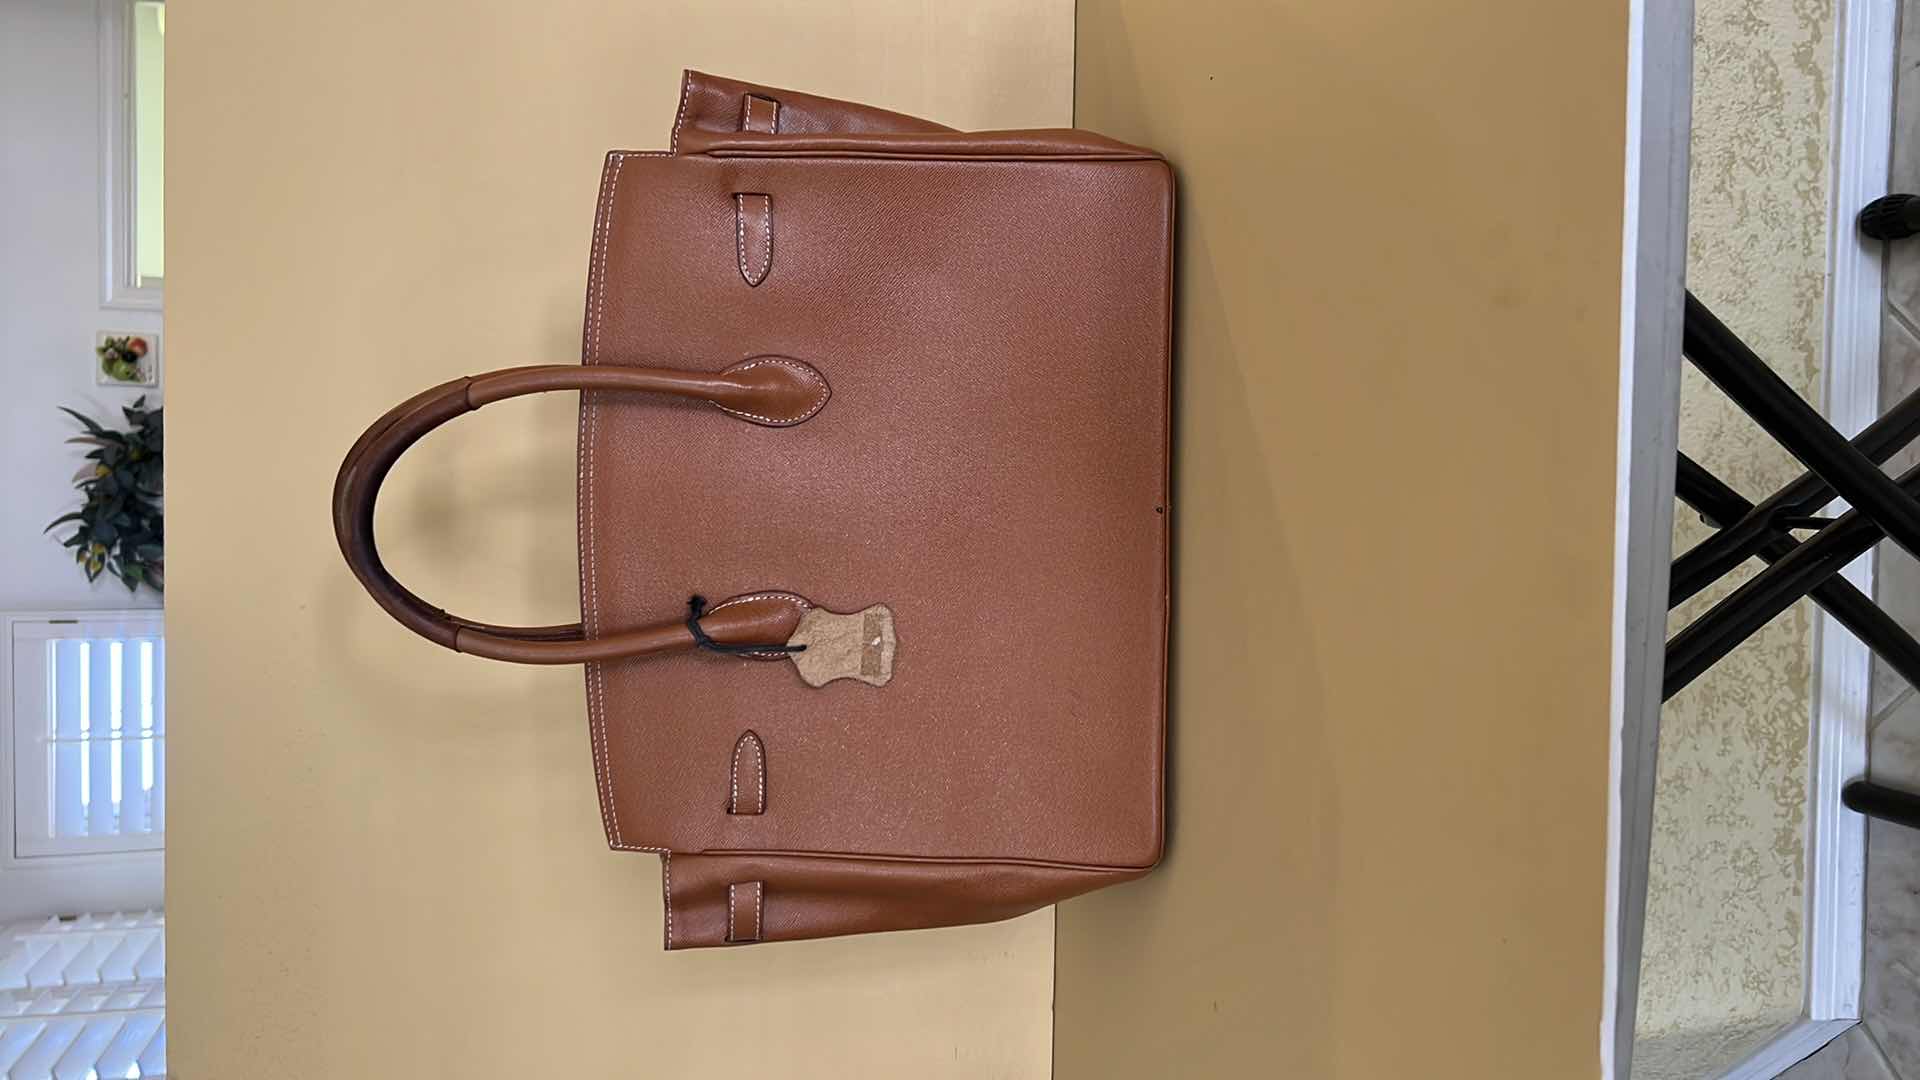 Photo 3 of TAN LEATHER HERMES LABEL HANDBAG (NOT AUTHENTIC)